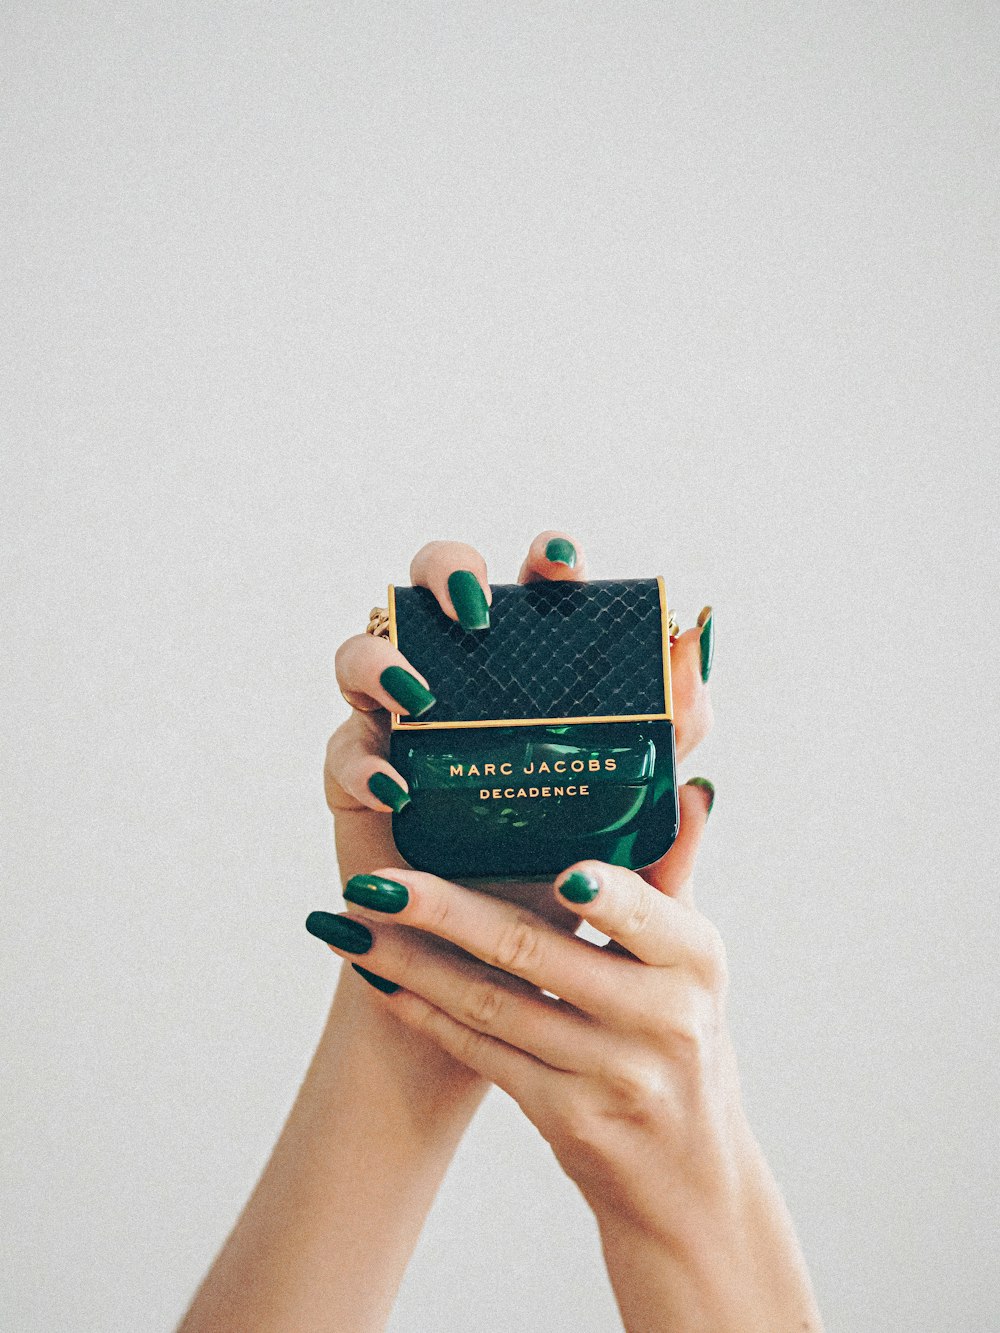 person holding black and green box